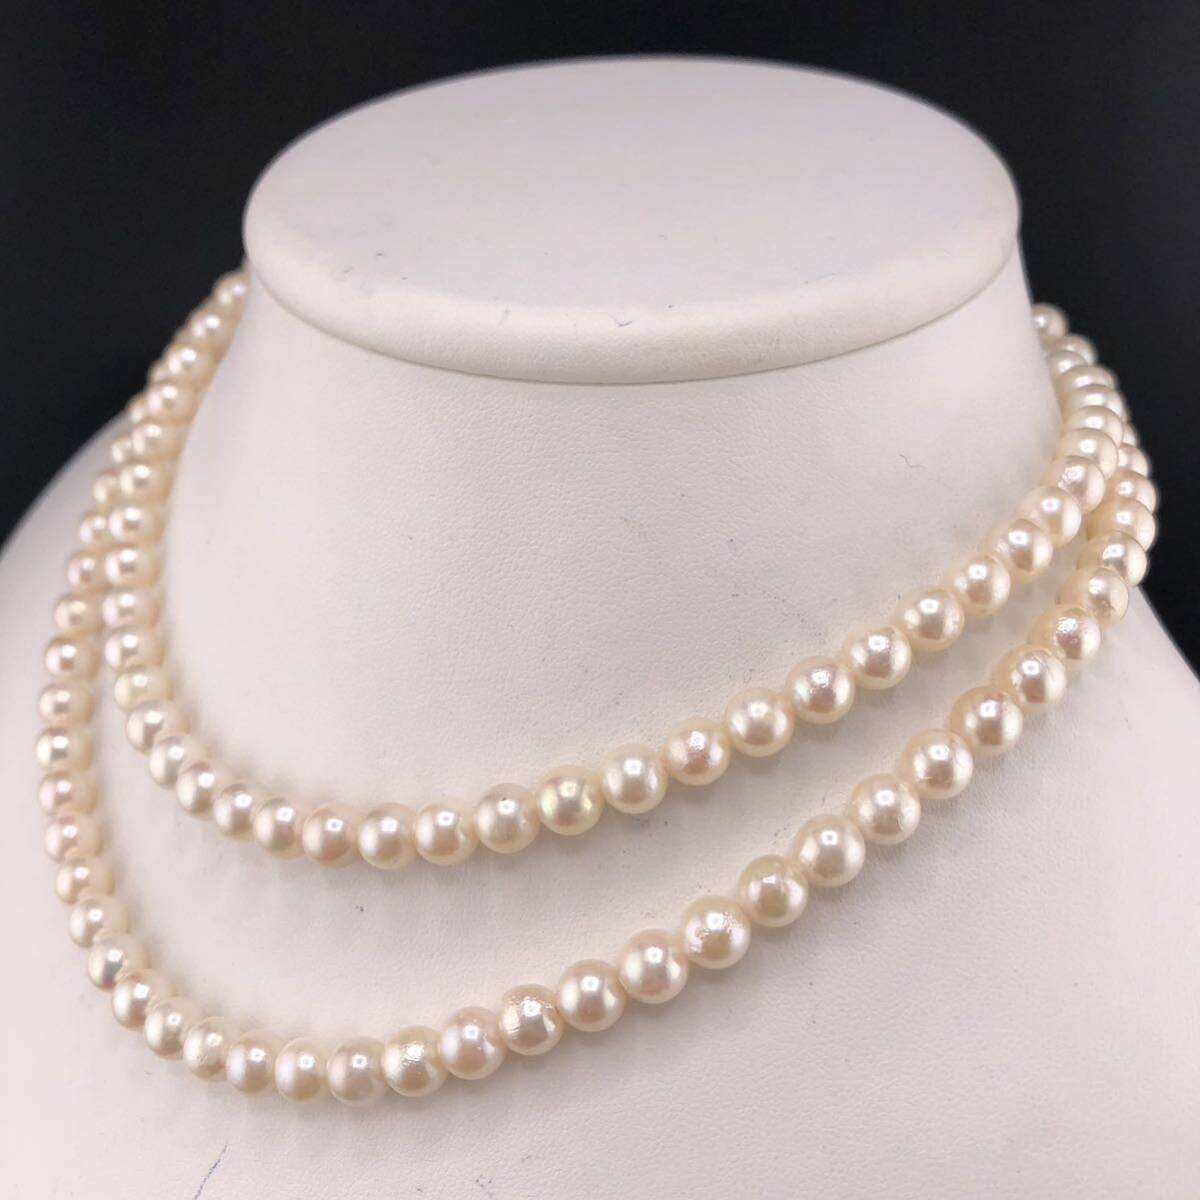 E05-2116 アコヤロングパールネックレス 6.5mm~7.0mm 80cm 55.4g ( アコヤ真珠 ロング Pearl necklace SILVER )の画像2